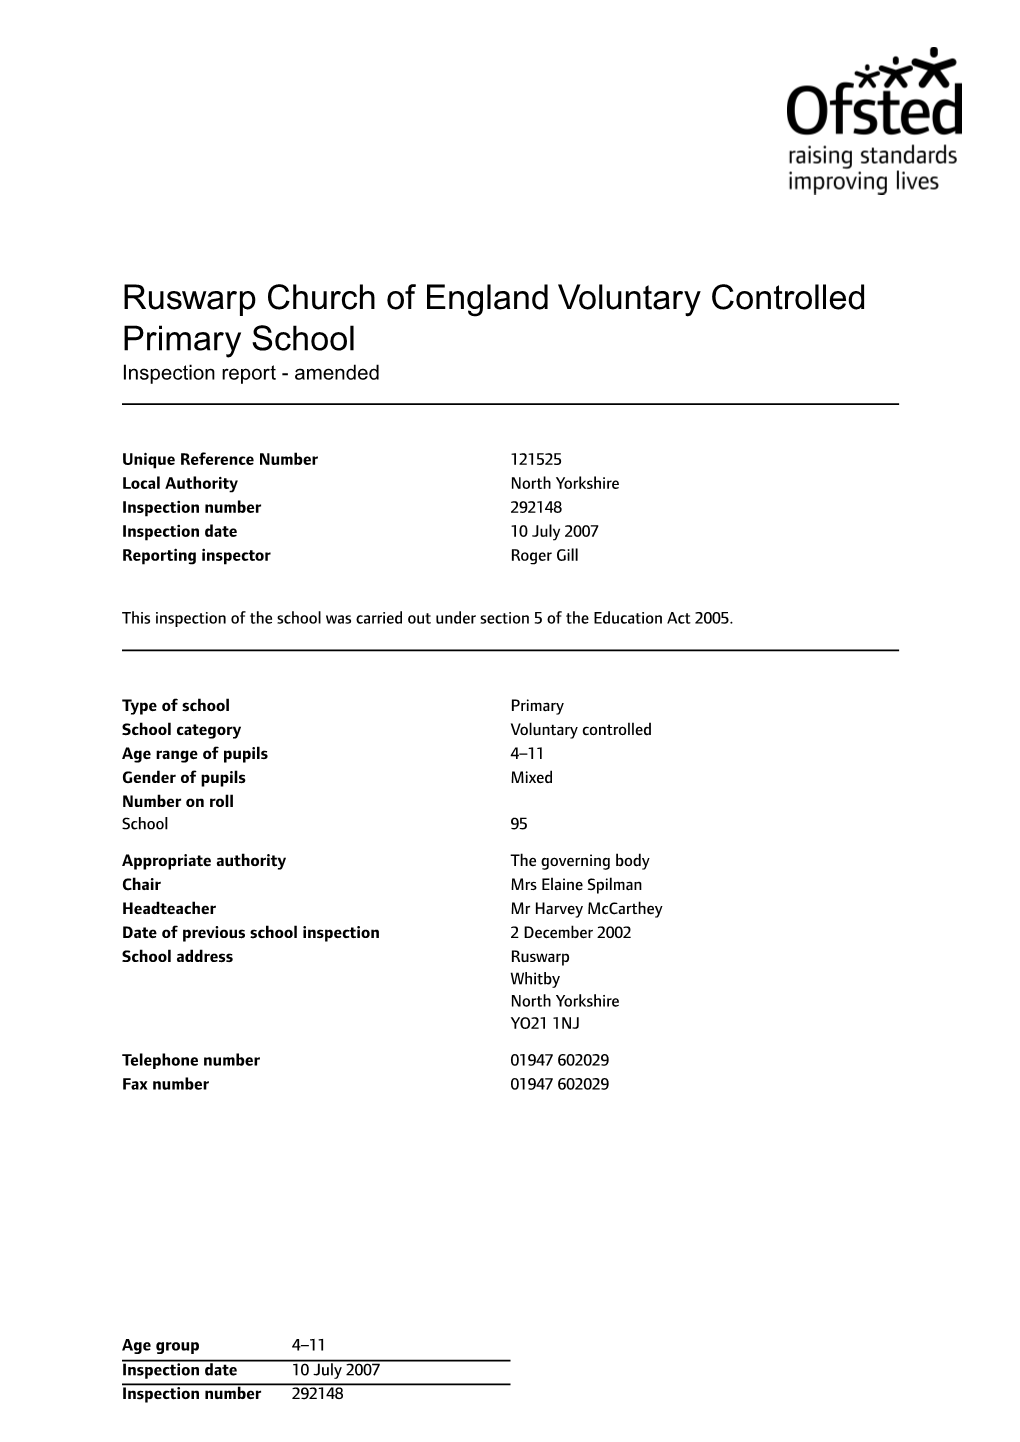 Ruswarp Church of England Voluntary Controlled Primary School Inspection Report - Amended